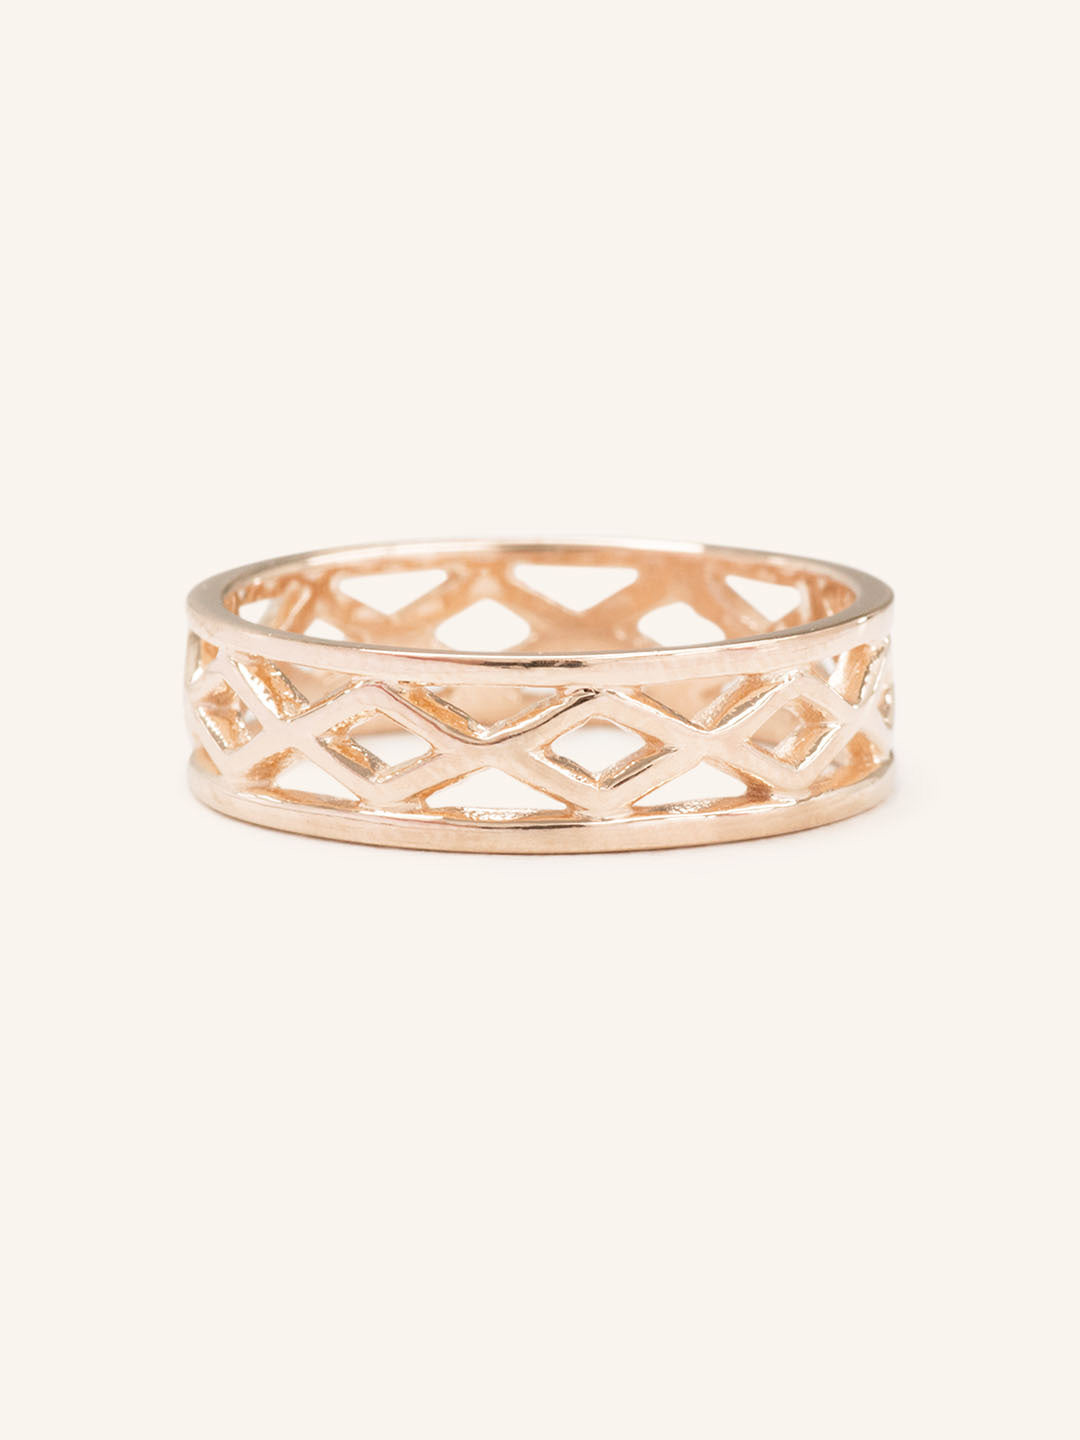 Stay Cozy Basket Weave Ring